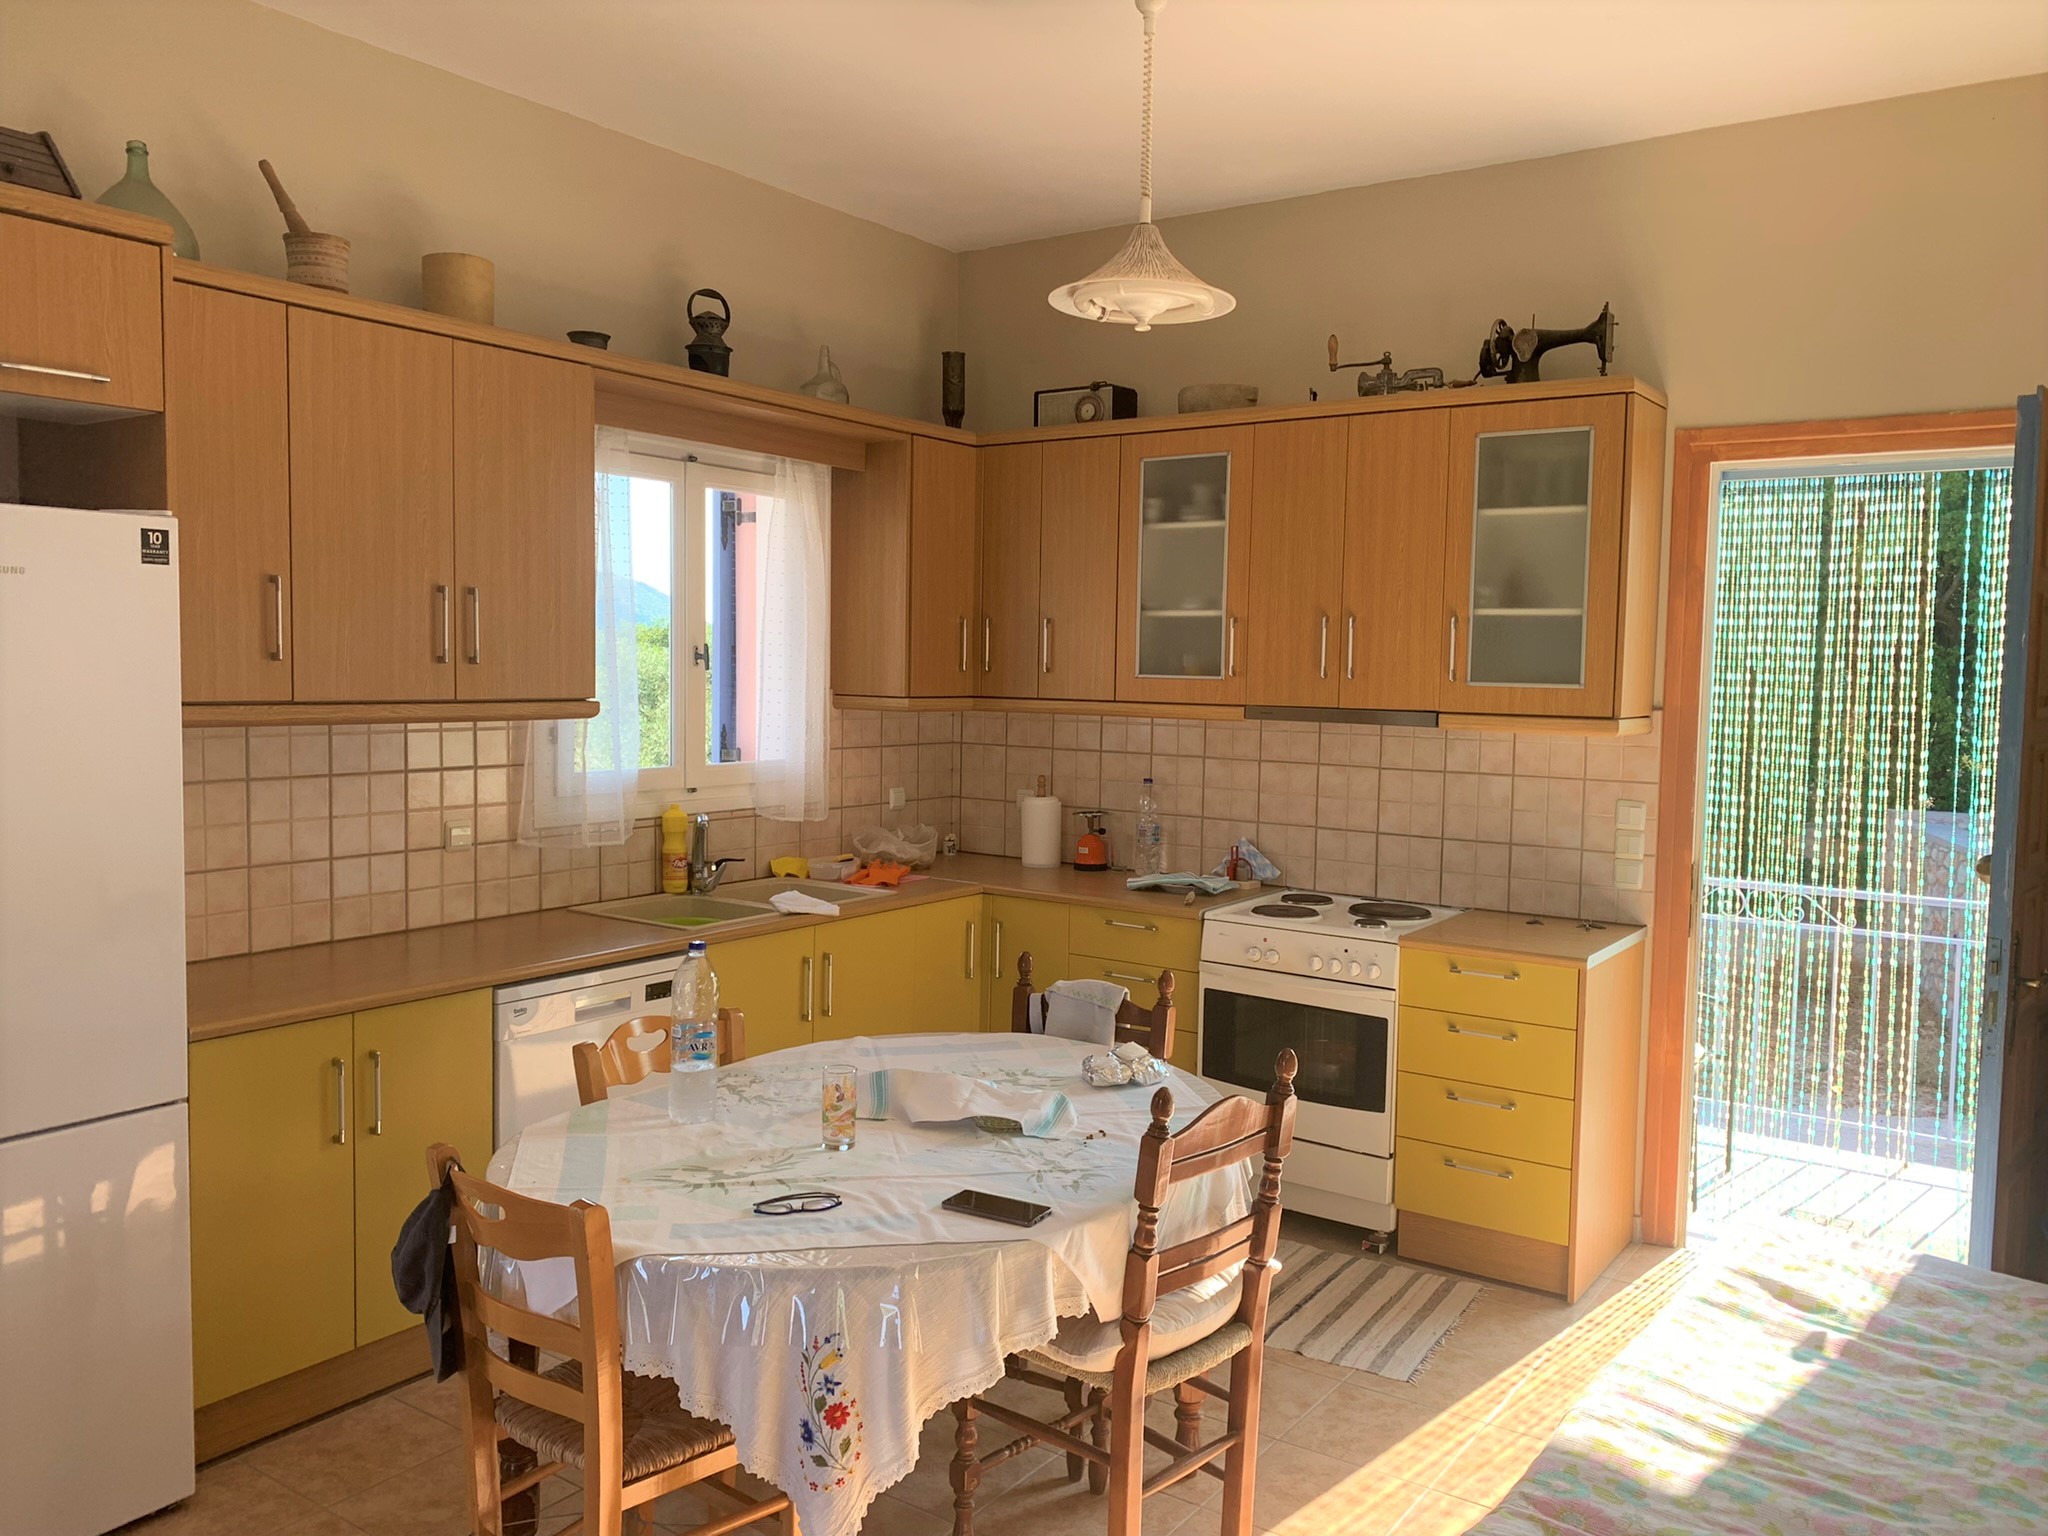 Kitchen of house for sale on Ithaca Greece, Stavros